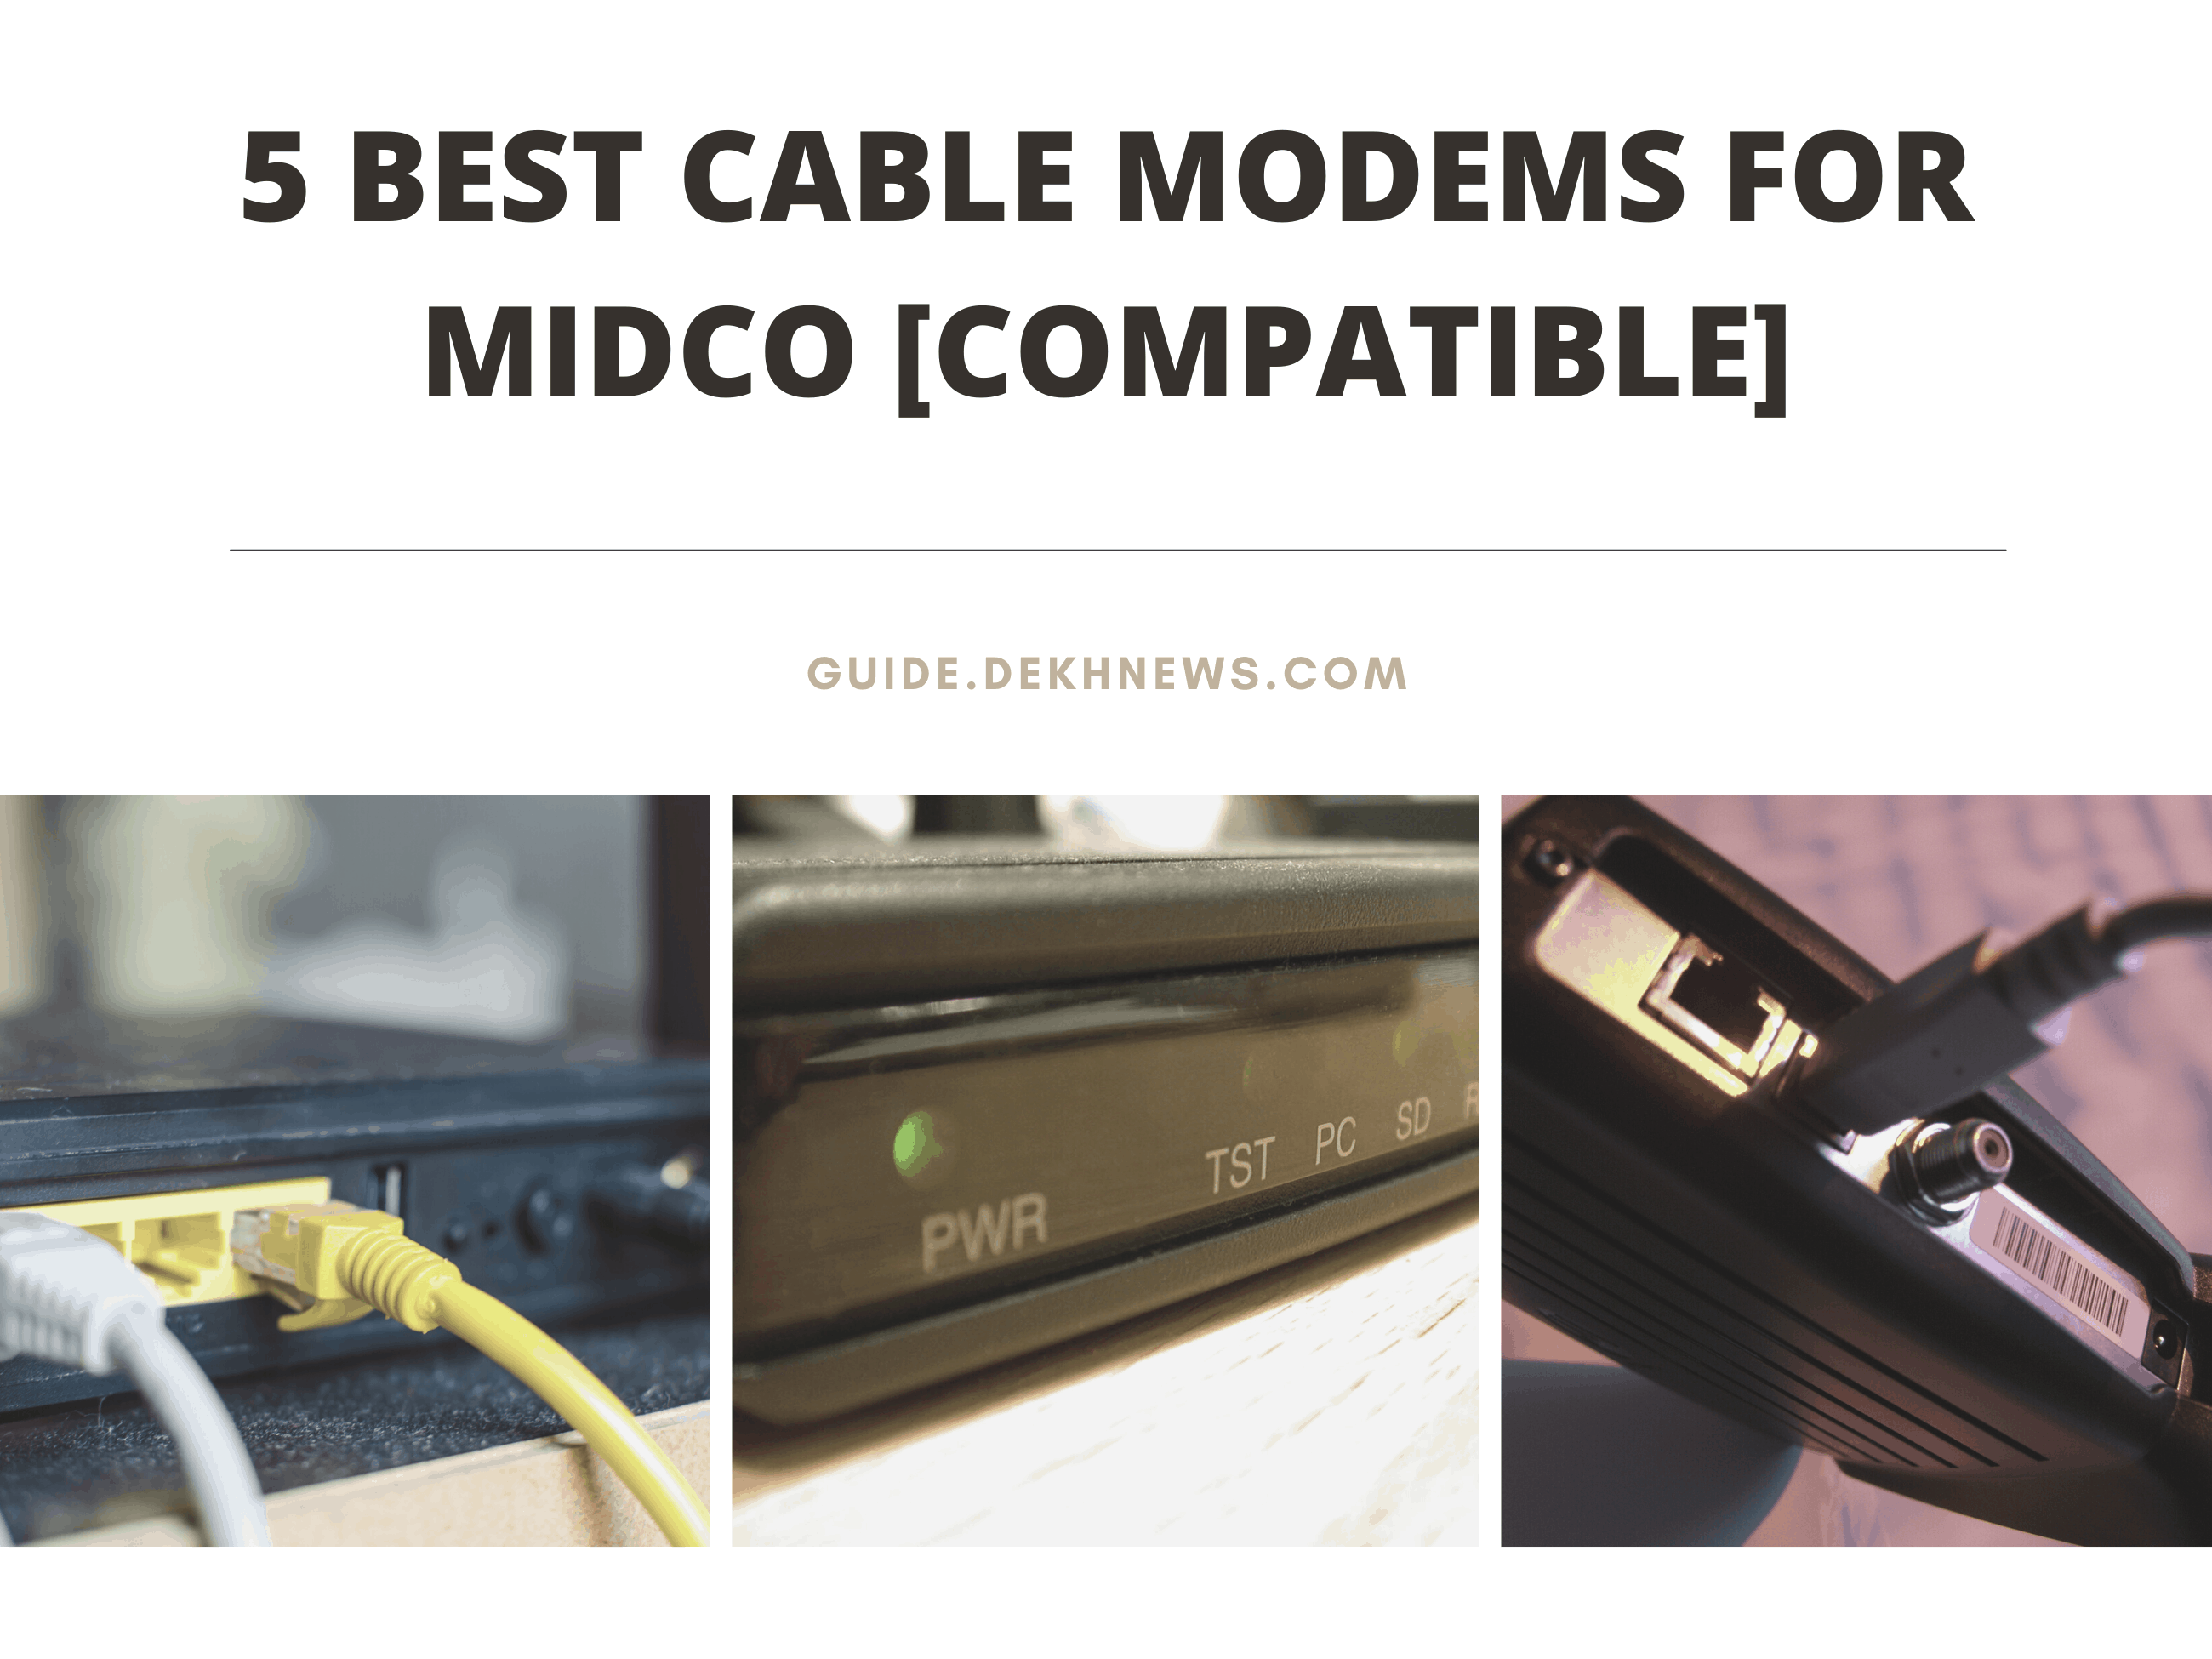 5-Best-Cable-Modems-for-Midco